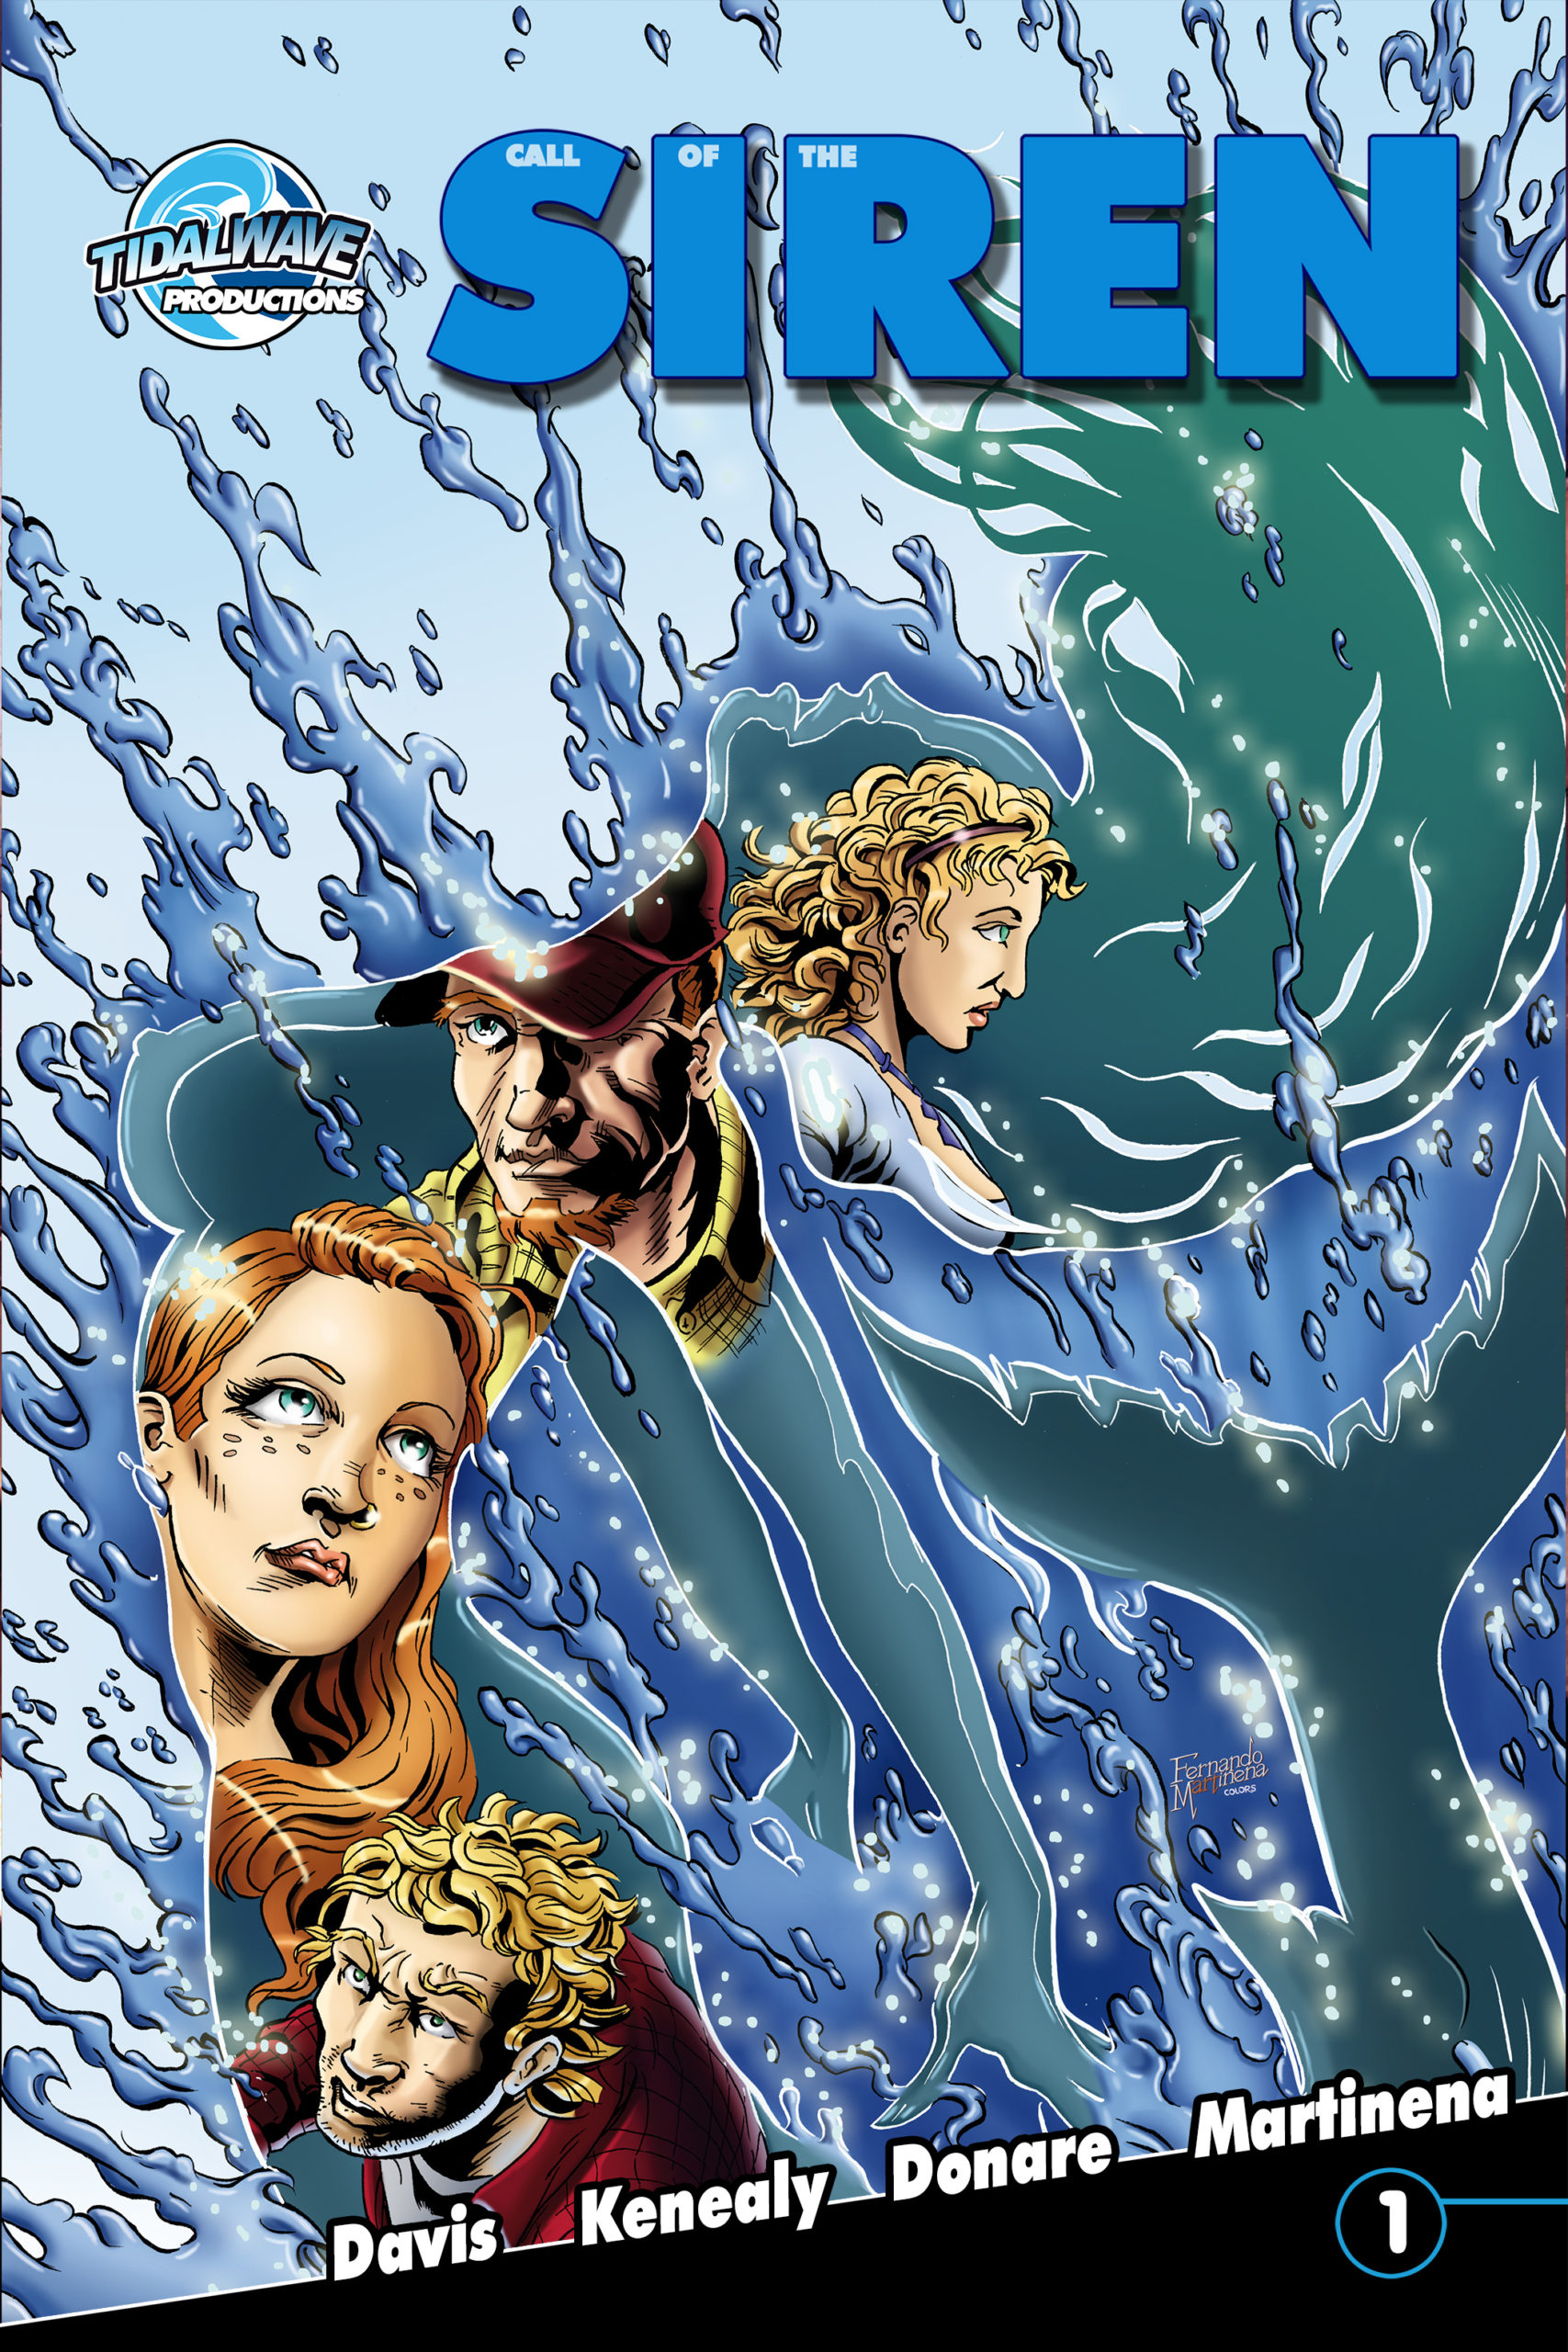 1ST LOOK AT CALL OF THE SIREN #1 - TidalWave Productions